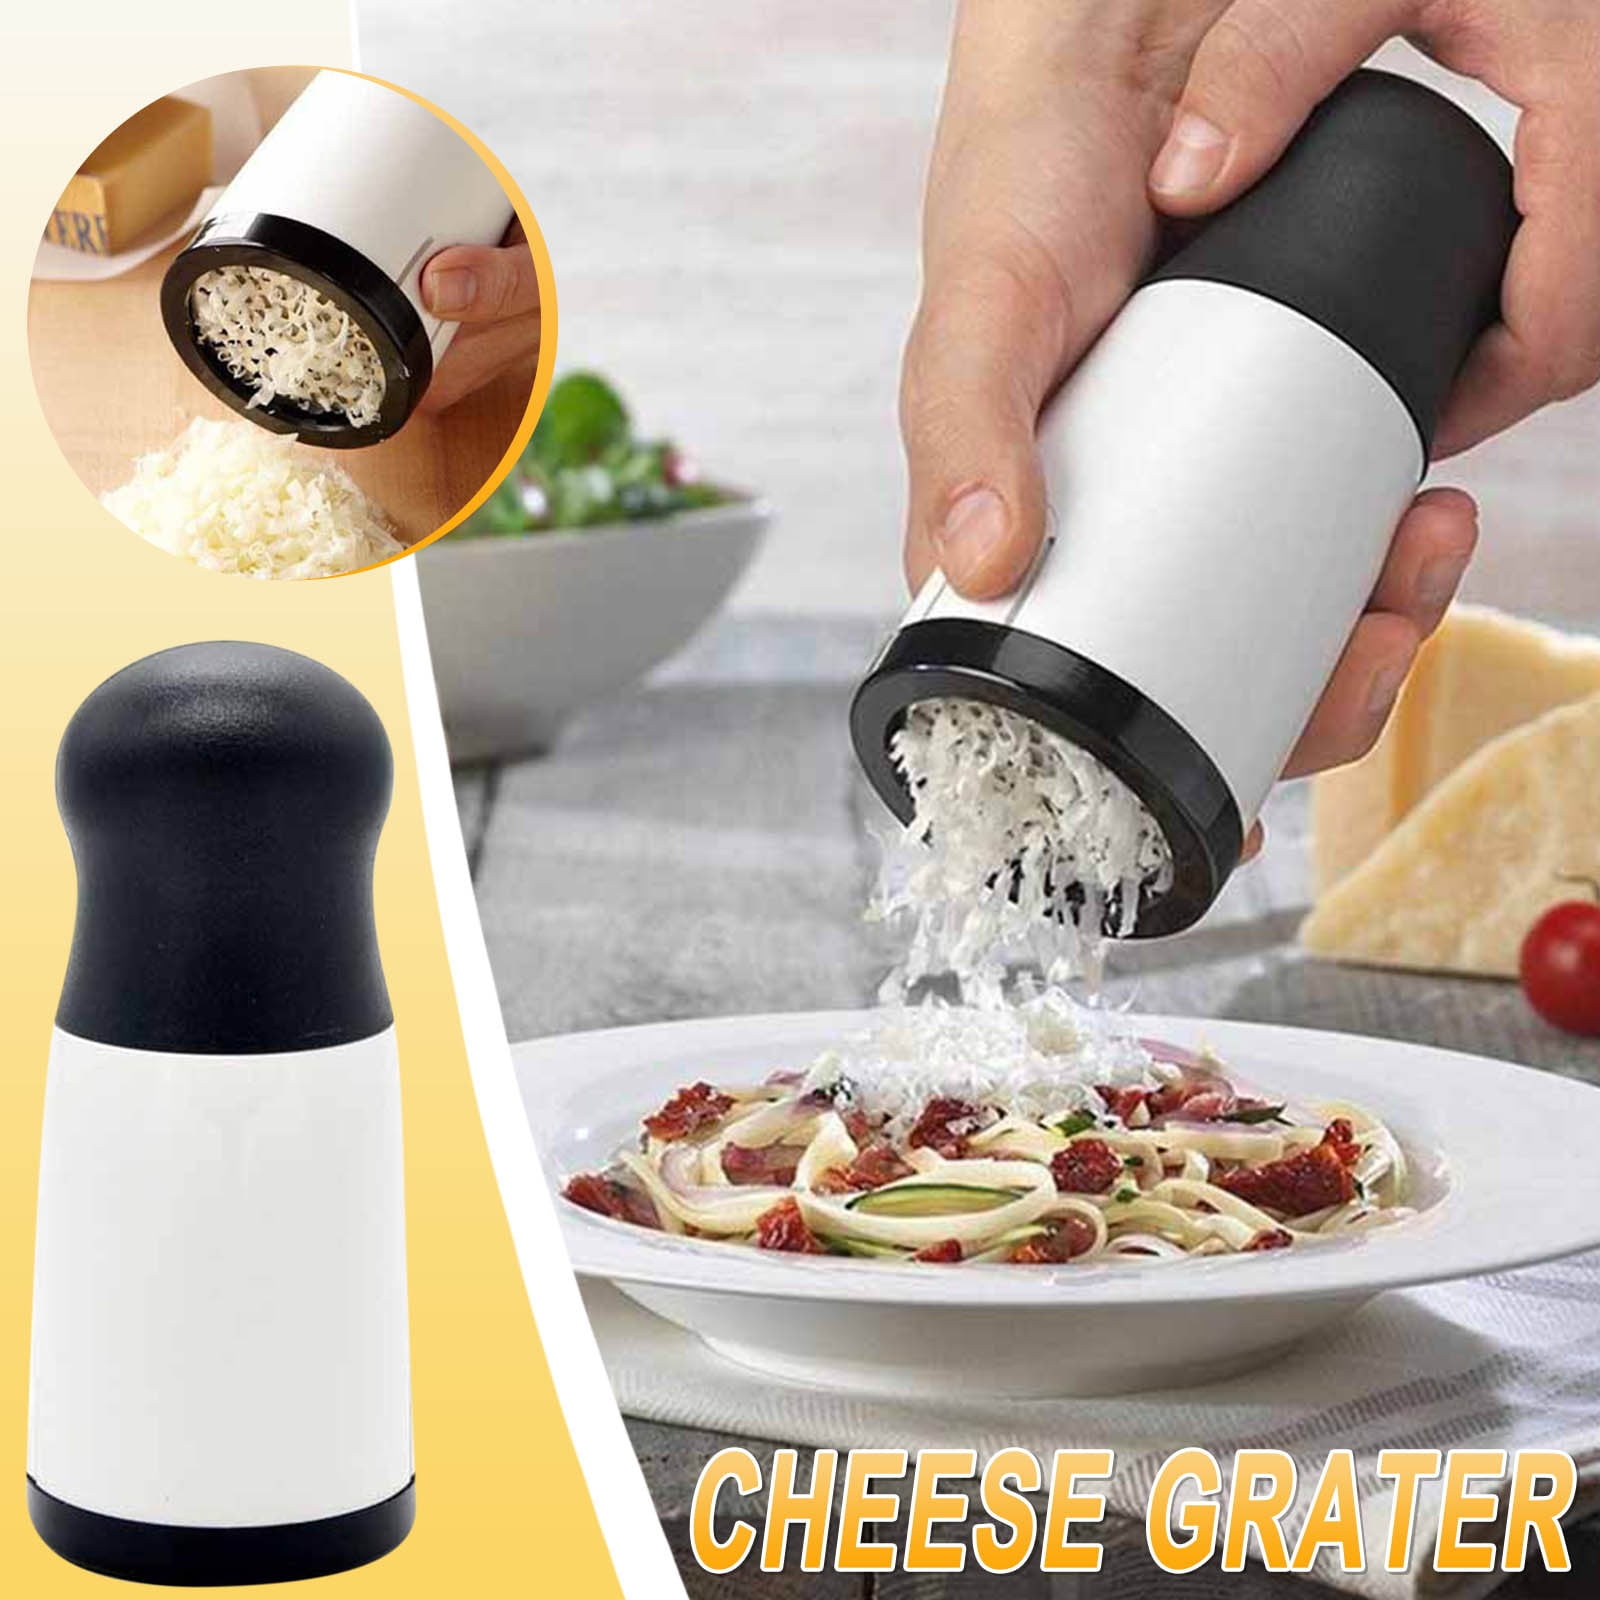  GrabOpener H-type : One-handed GrabOpener with Scratch  Resistant Finish (Metal): Grabopener: Home & Kitchen